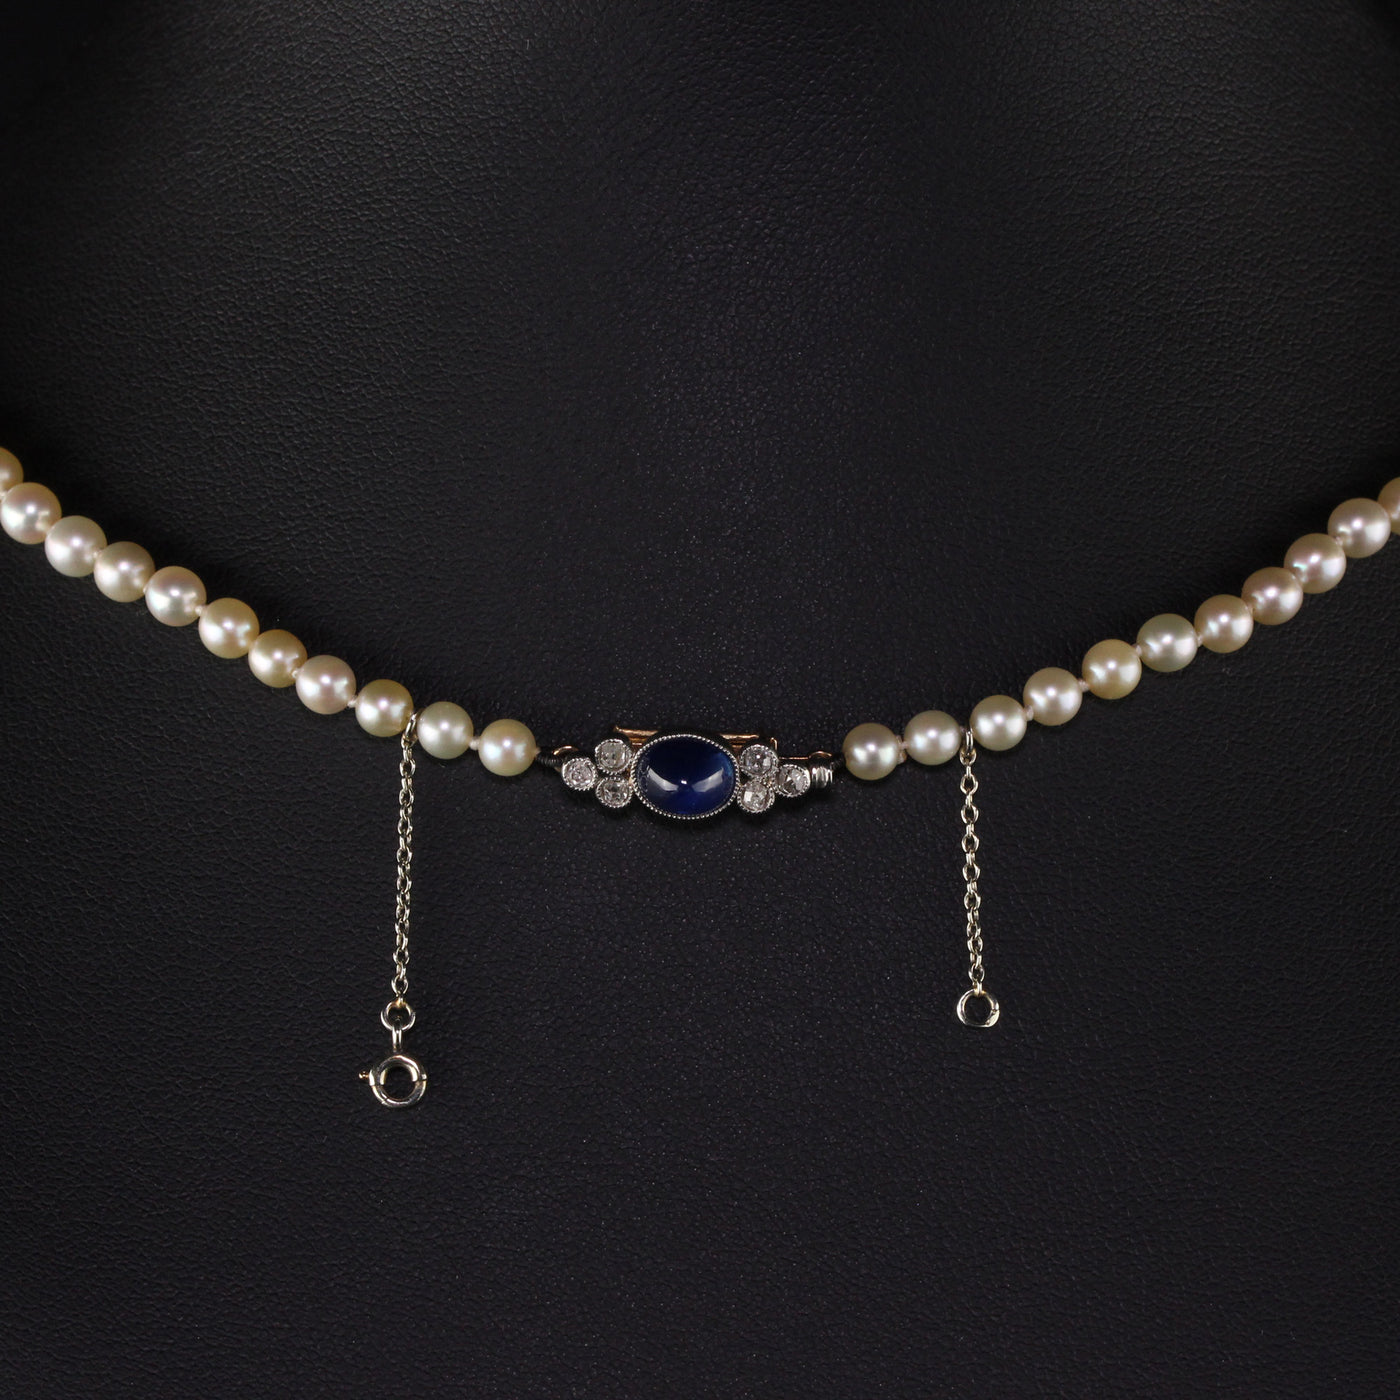 Antique Art Deco 14K Rose Gold Diamond and Sapphire Natural Akoya Pearl Necklace